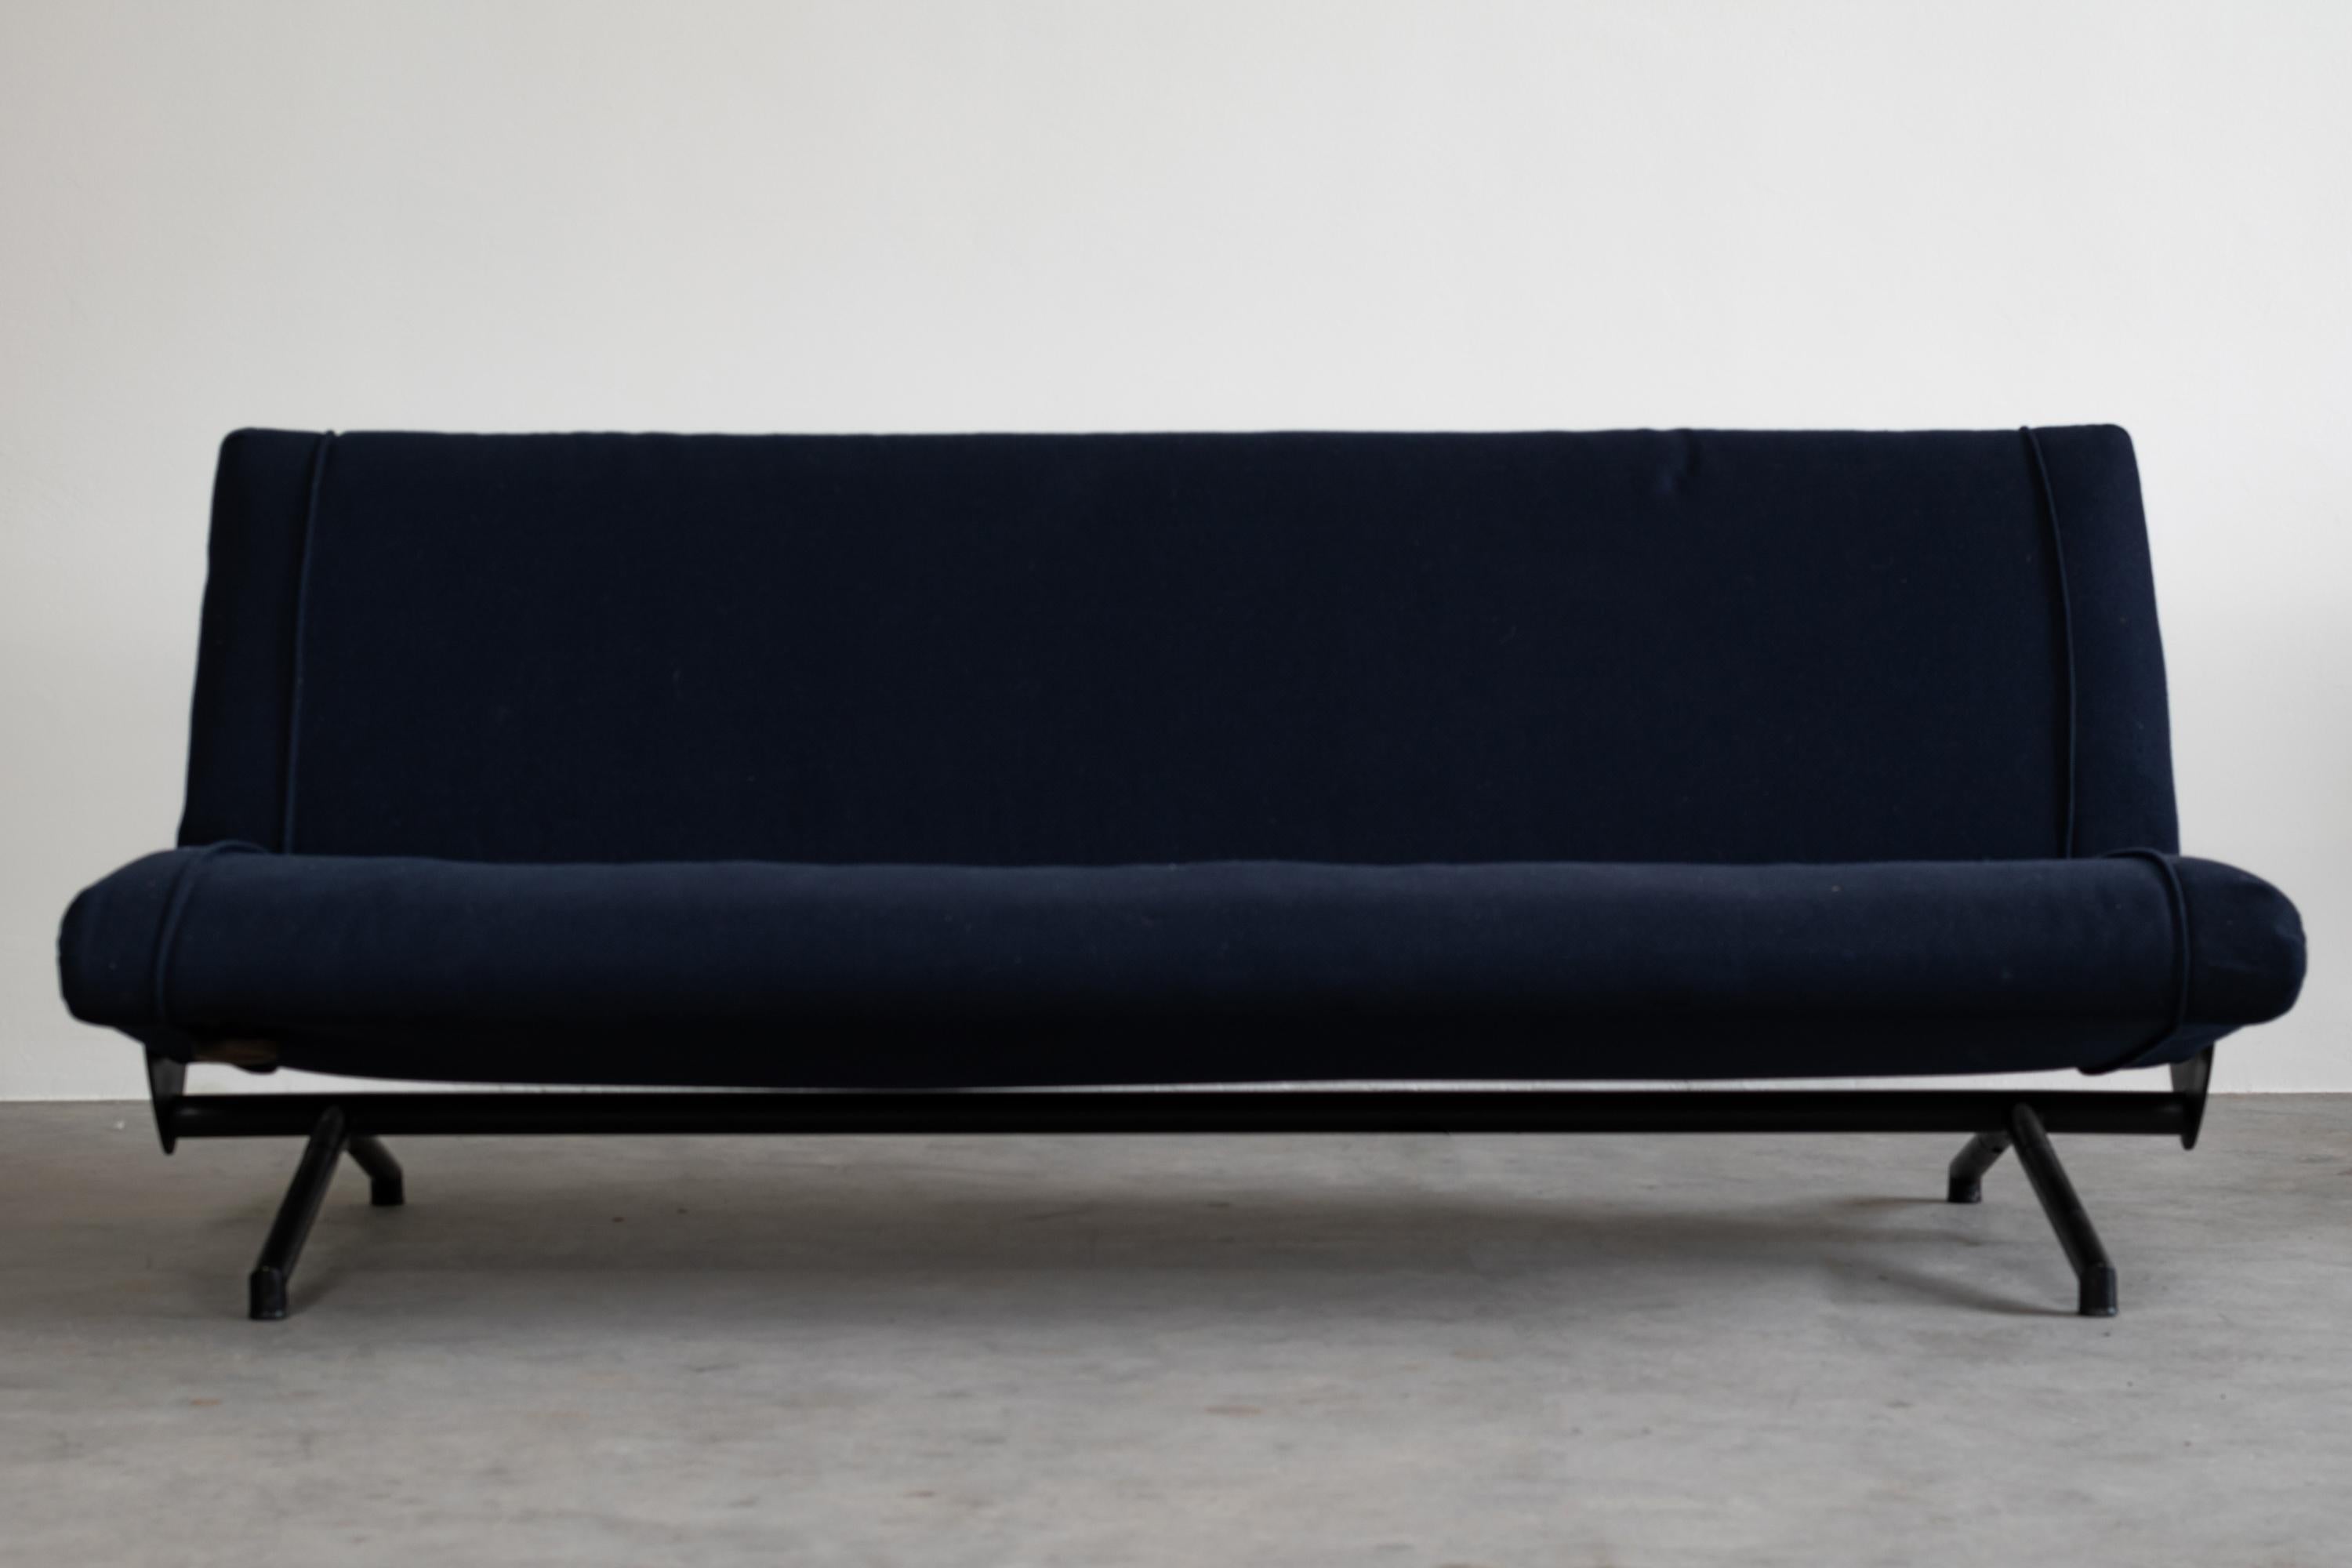 The customizable D70 sofa has two pivoting wings, a metal frame, polyurethane foam filling, and blue fabric upholstery, designed by Osvaldo Borsani in 1953 and manufactured by Tecno.

The opening mechanism consists of a lever with a securing pin